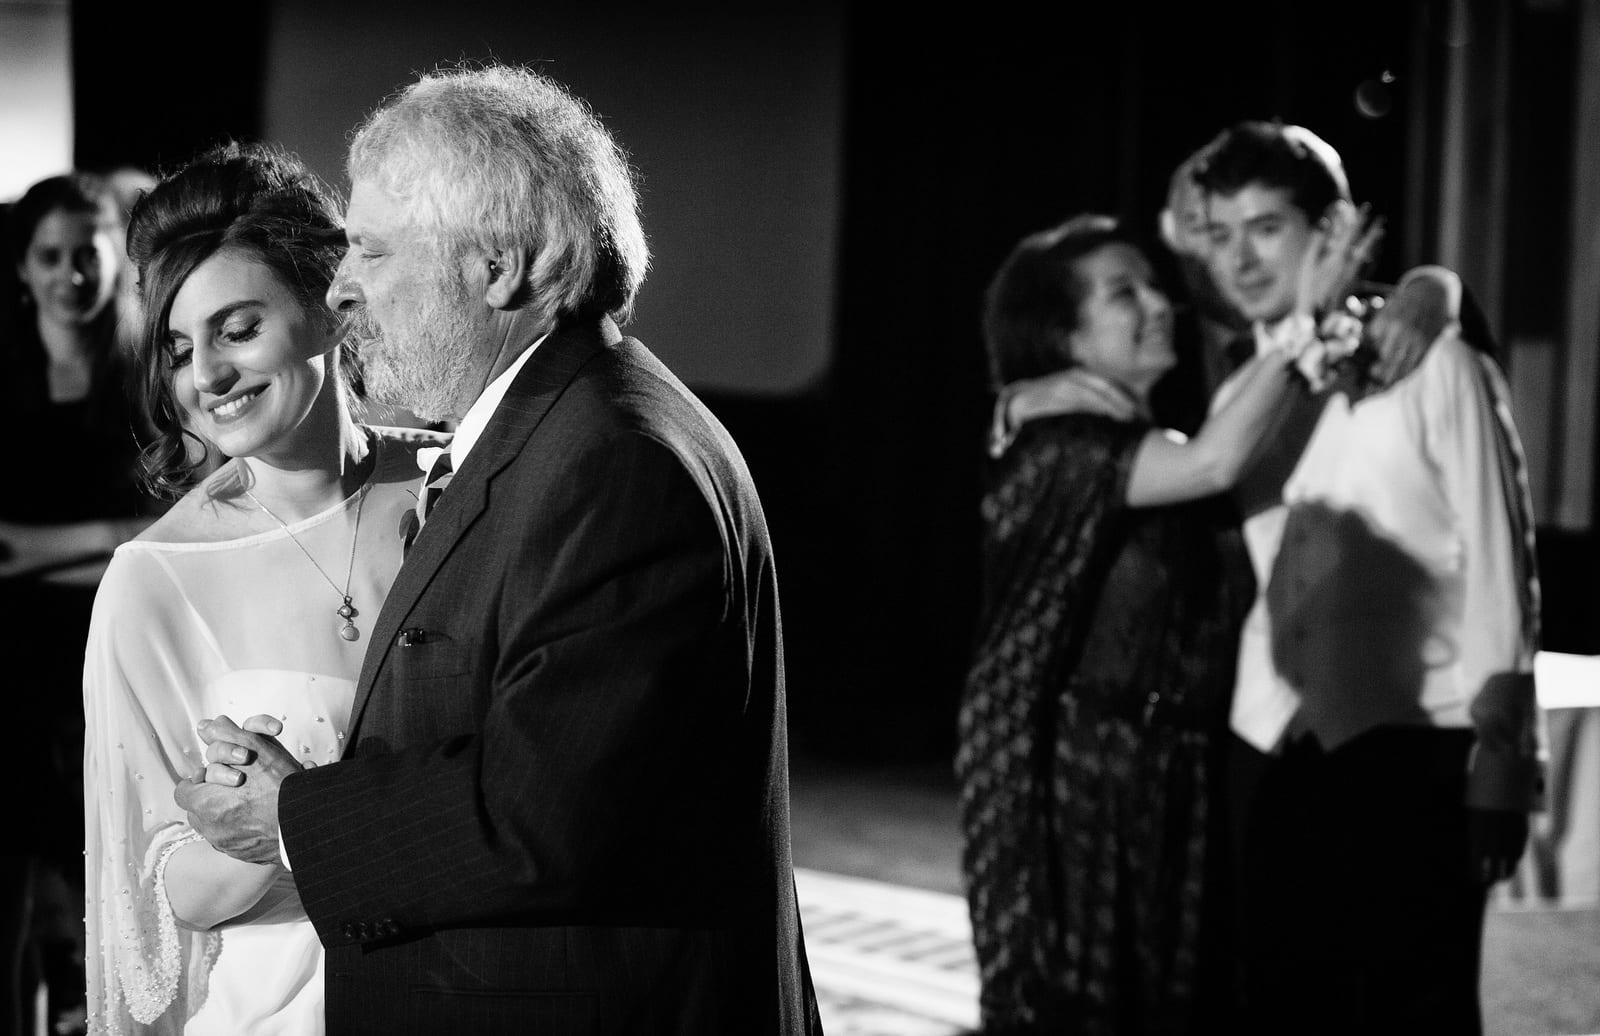 A bride and her father dance while the groom watches in the background as his happy parents embrace him.